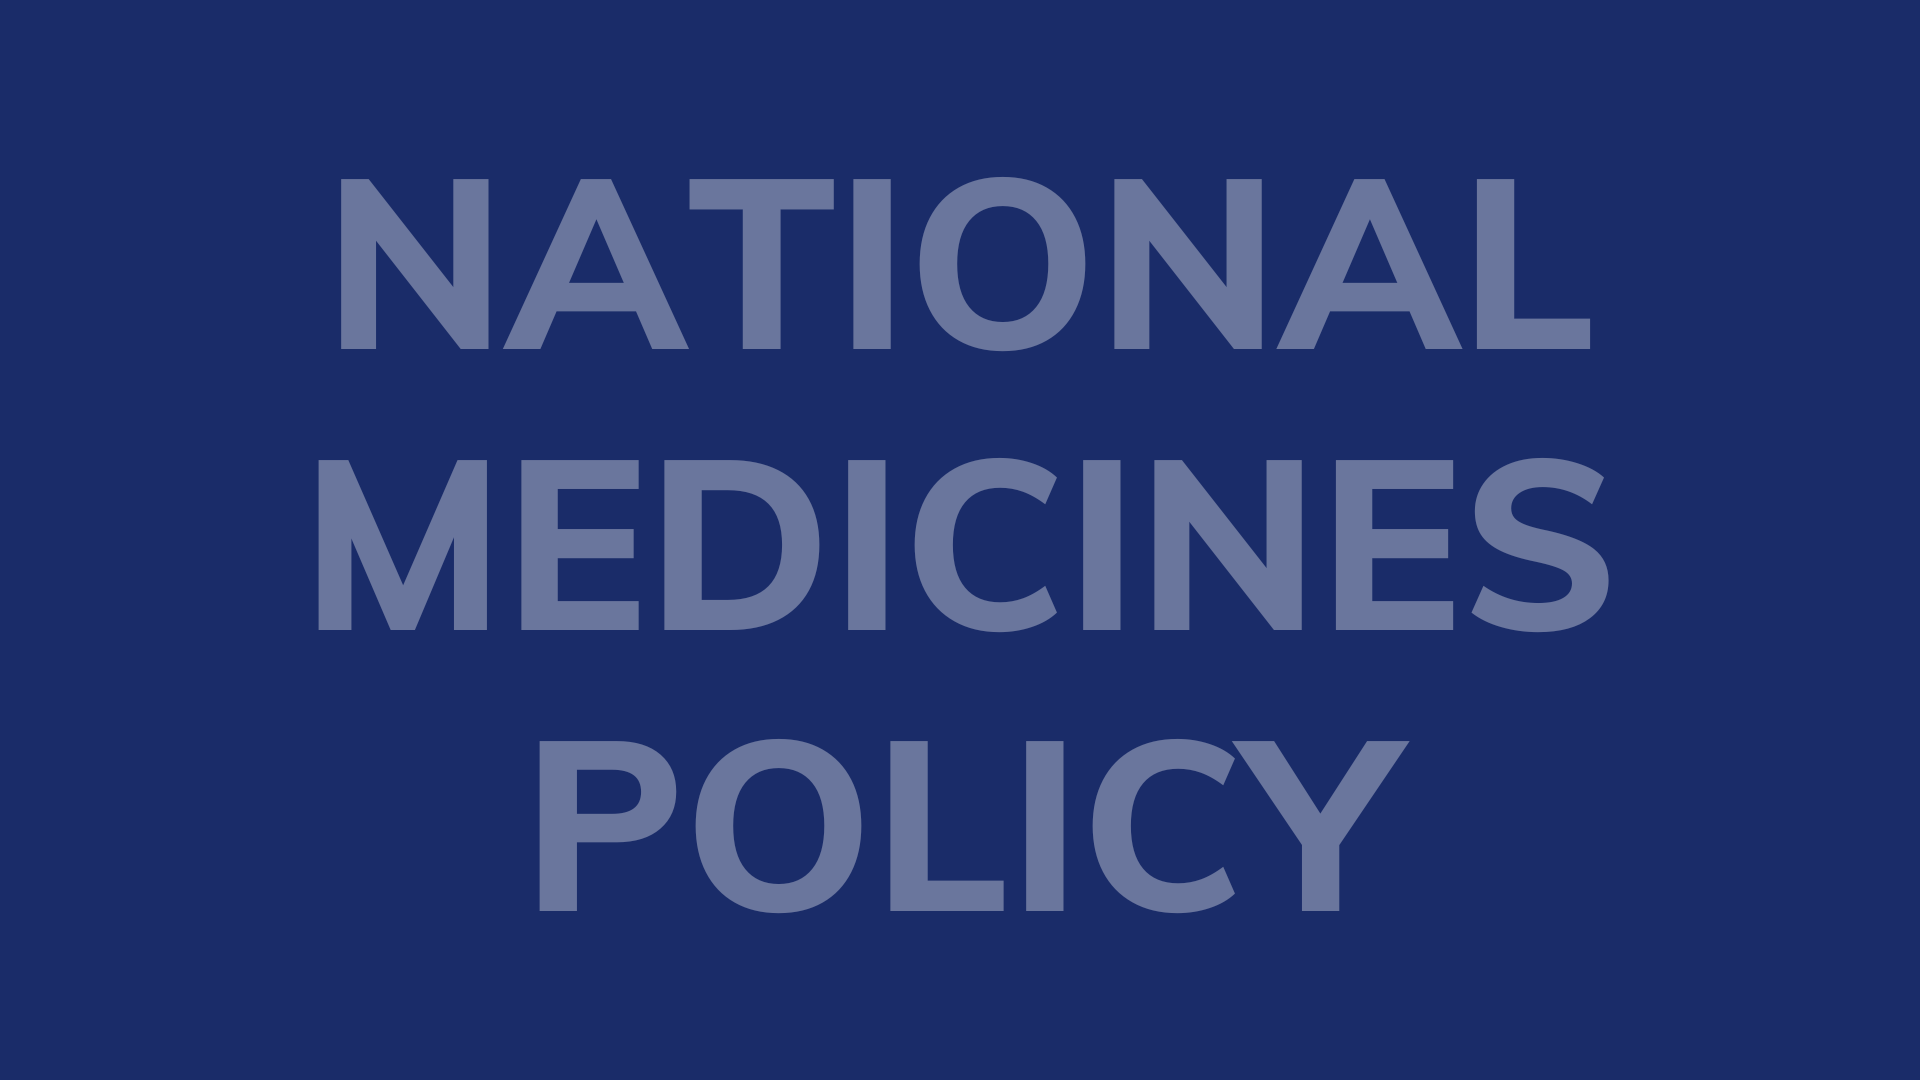 Restart of National Medicines Policy Review is welcome, but assurances needed over further consultation and feedback processes